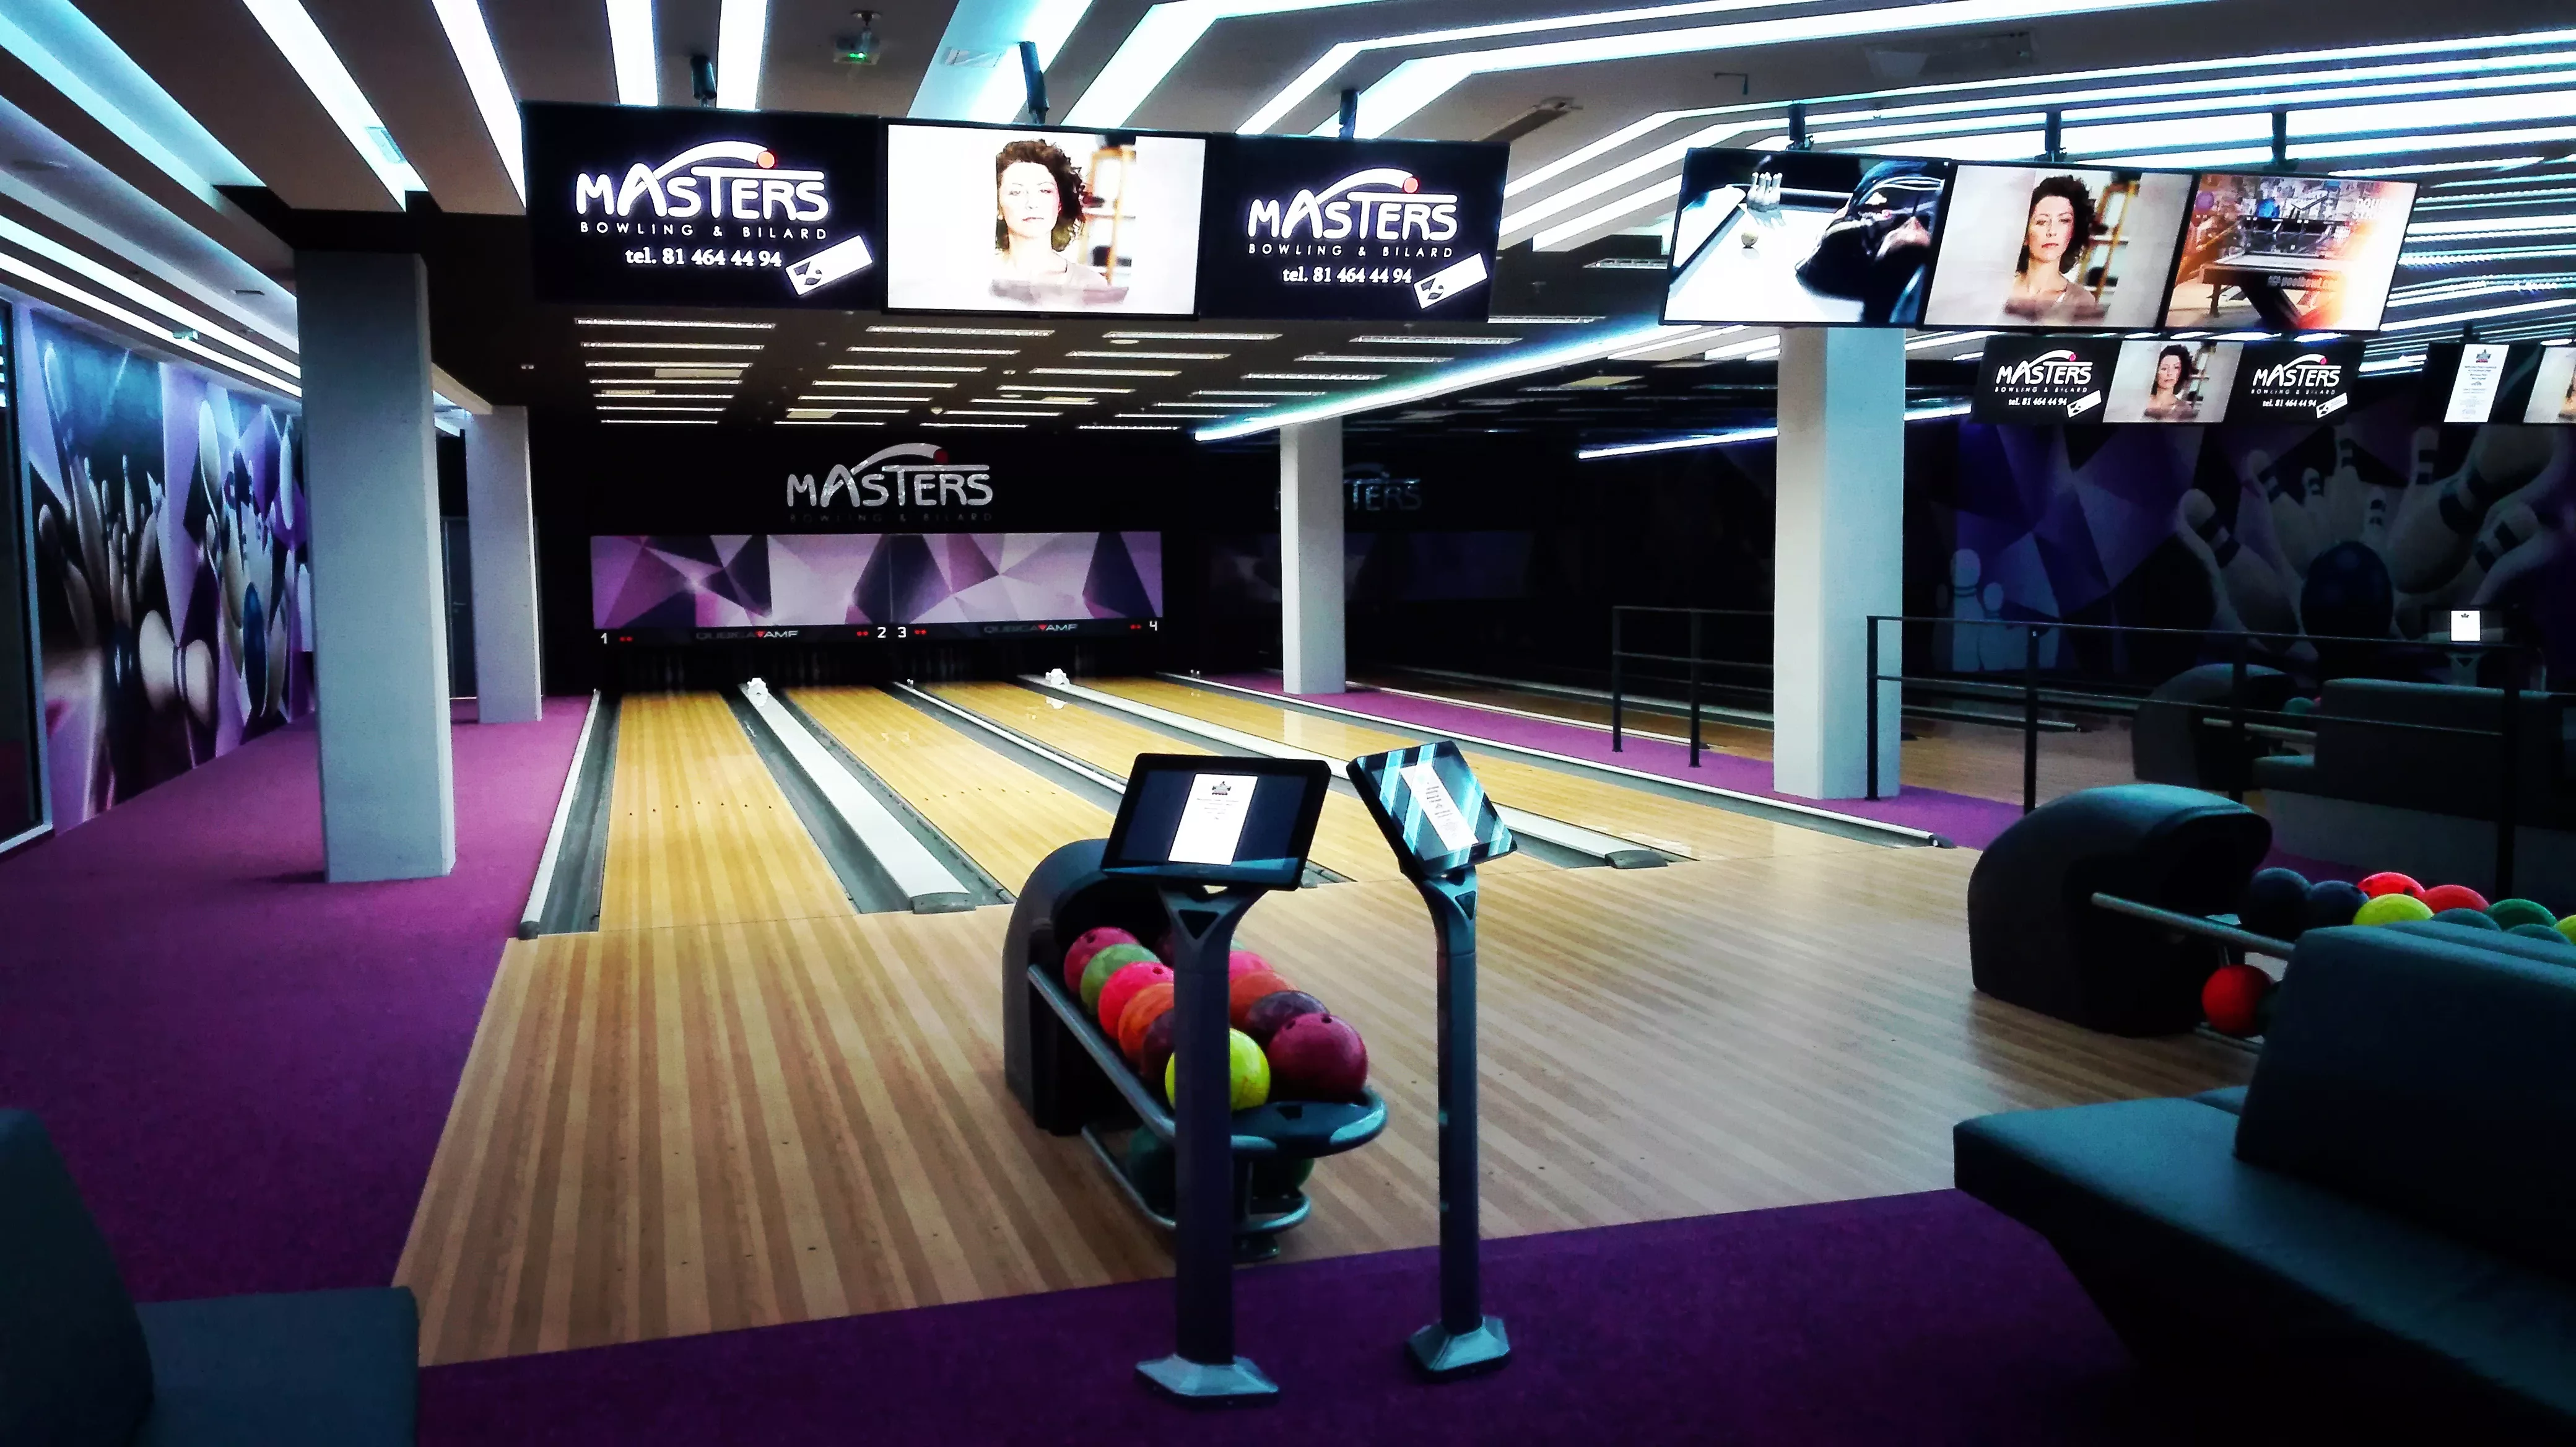 Masters Bowling&Billiard in Poland, Europe | Bowling,Billiards - Rated 4.2